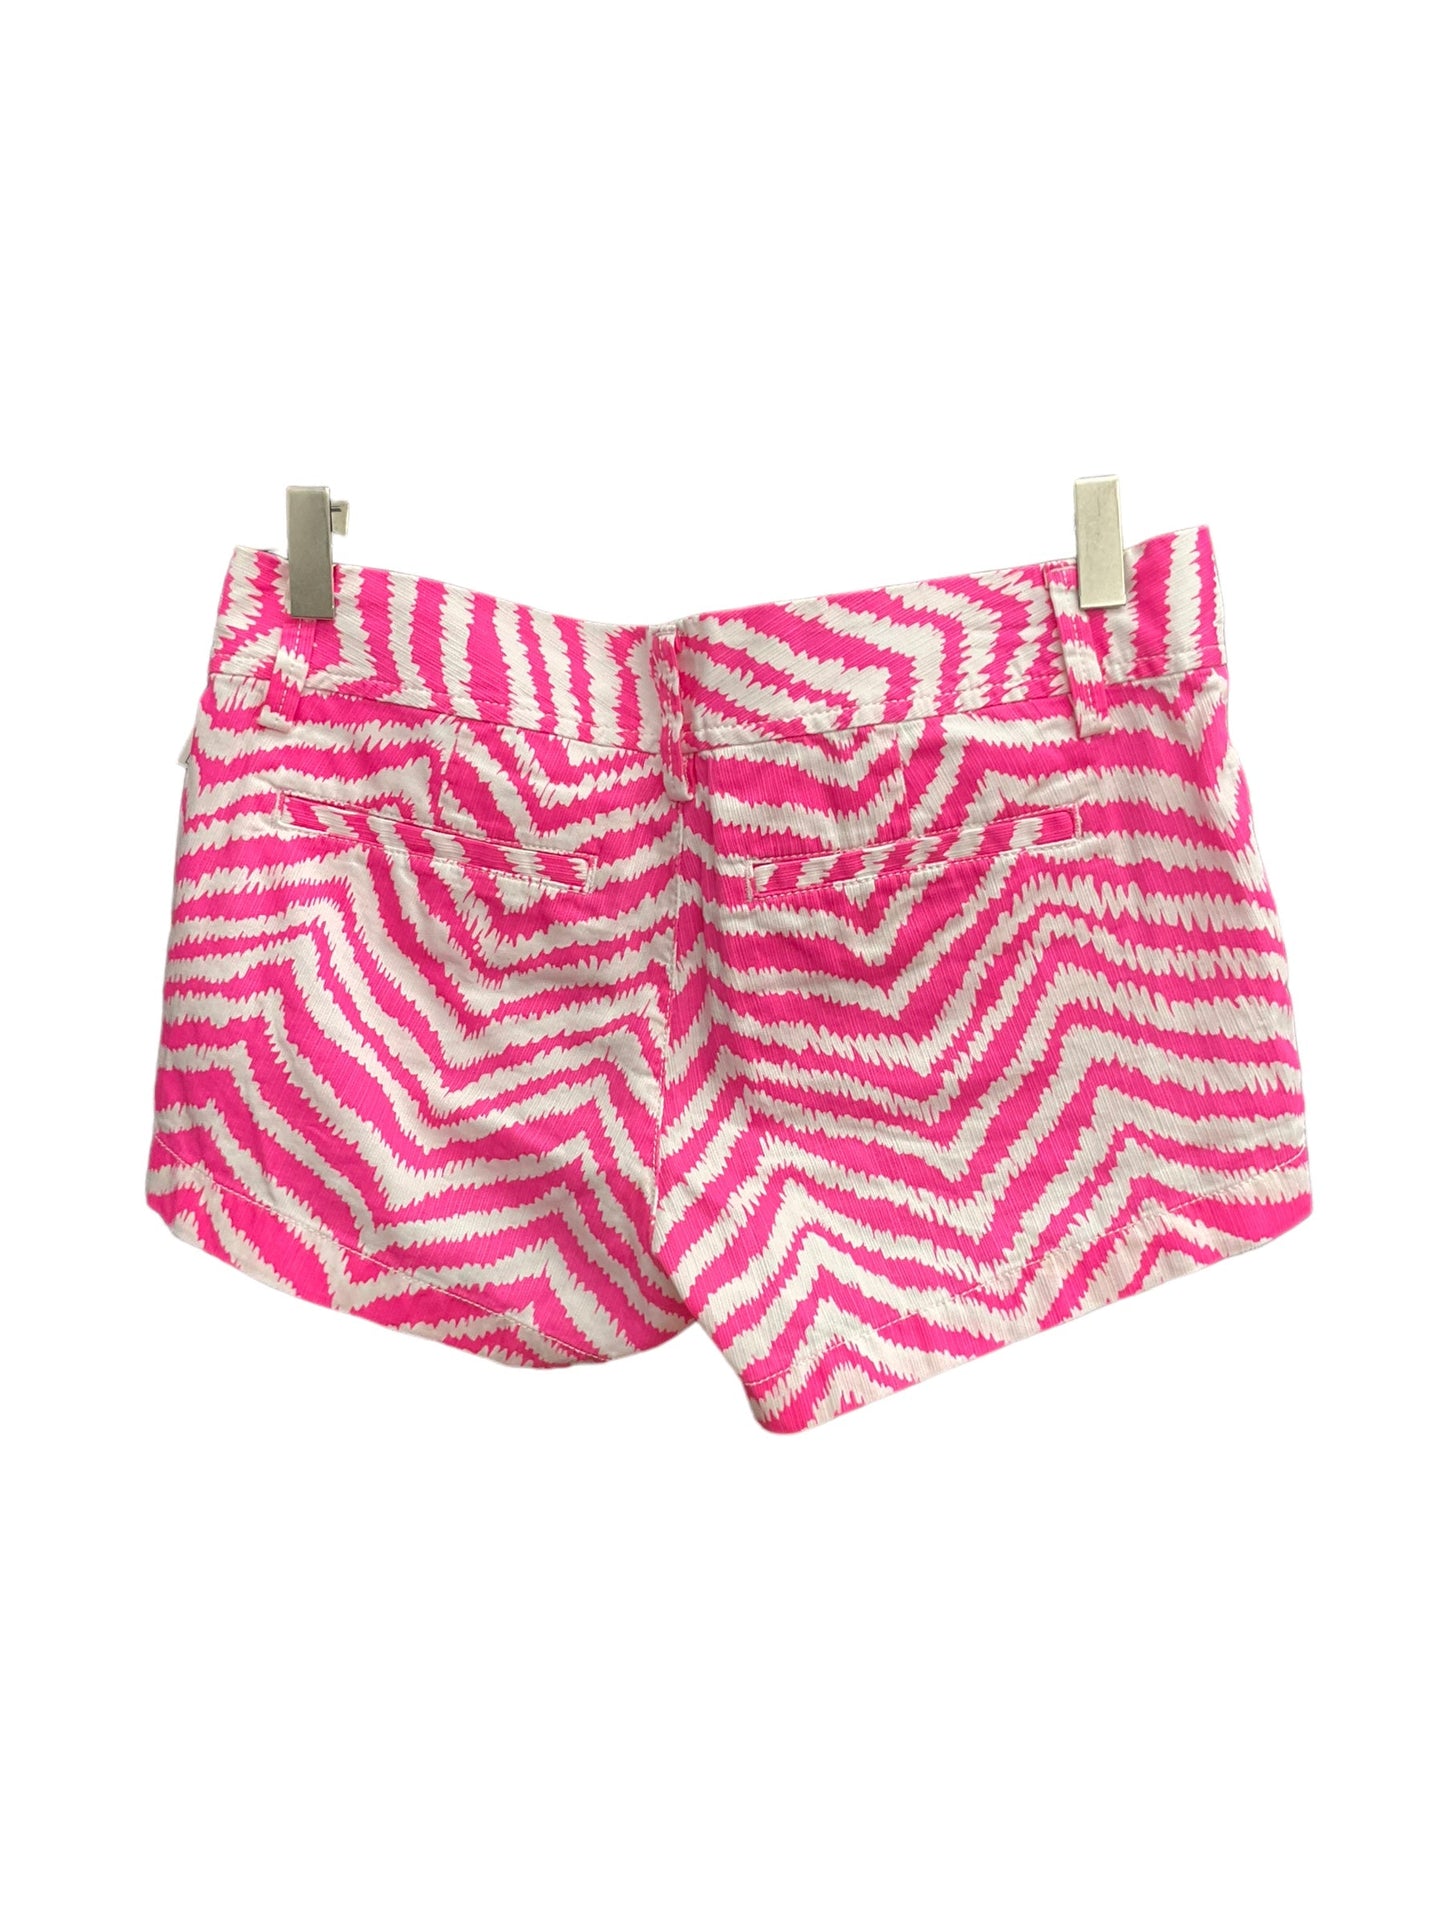 Pink & White Shorts Lilly Pulitzer, Size 2